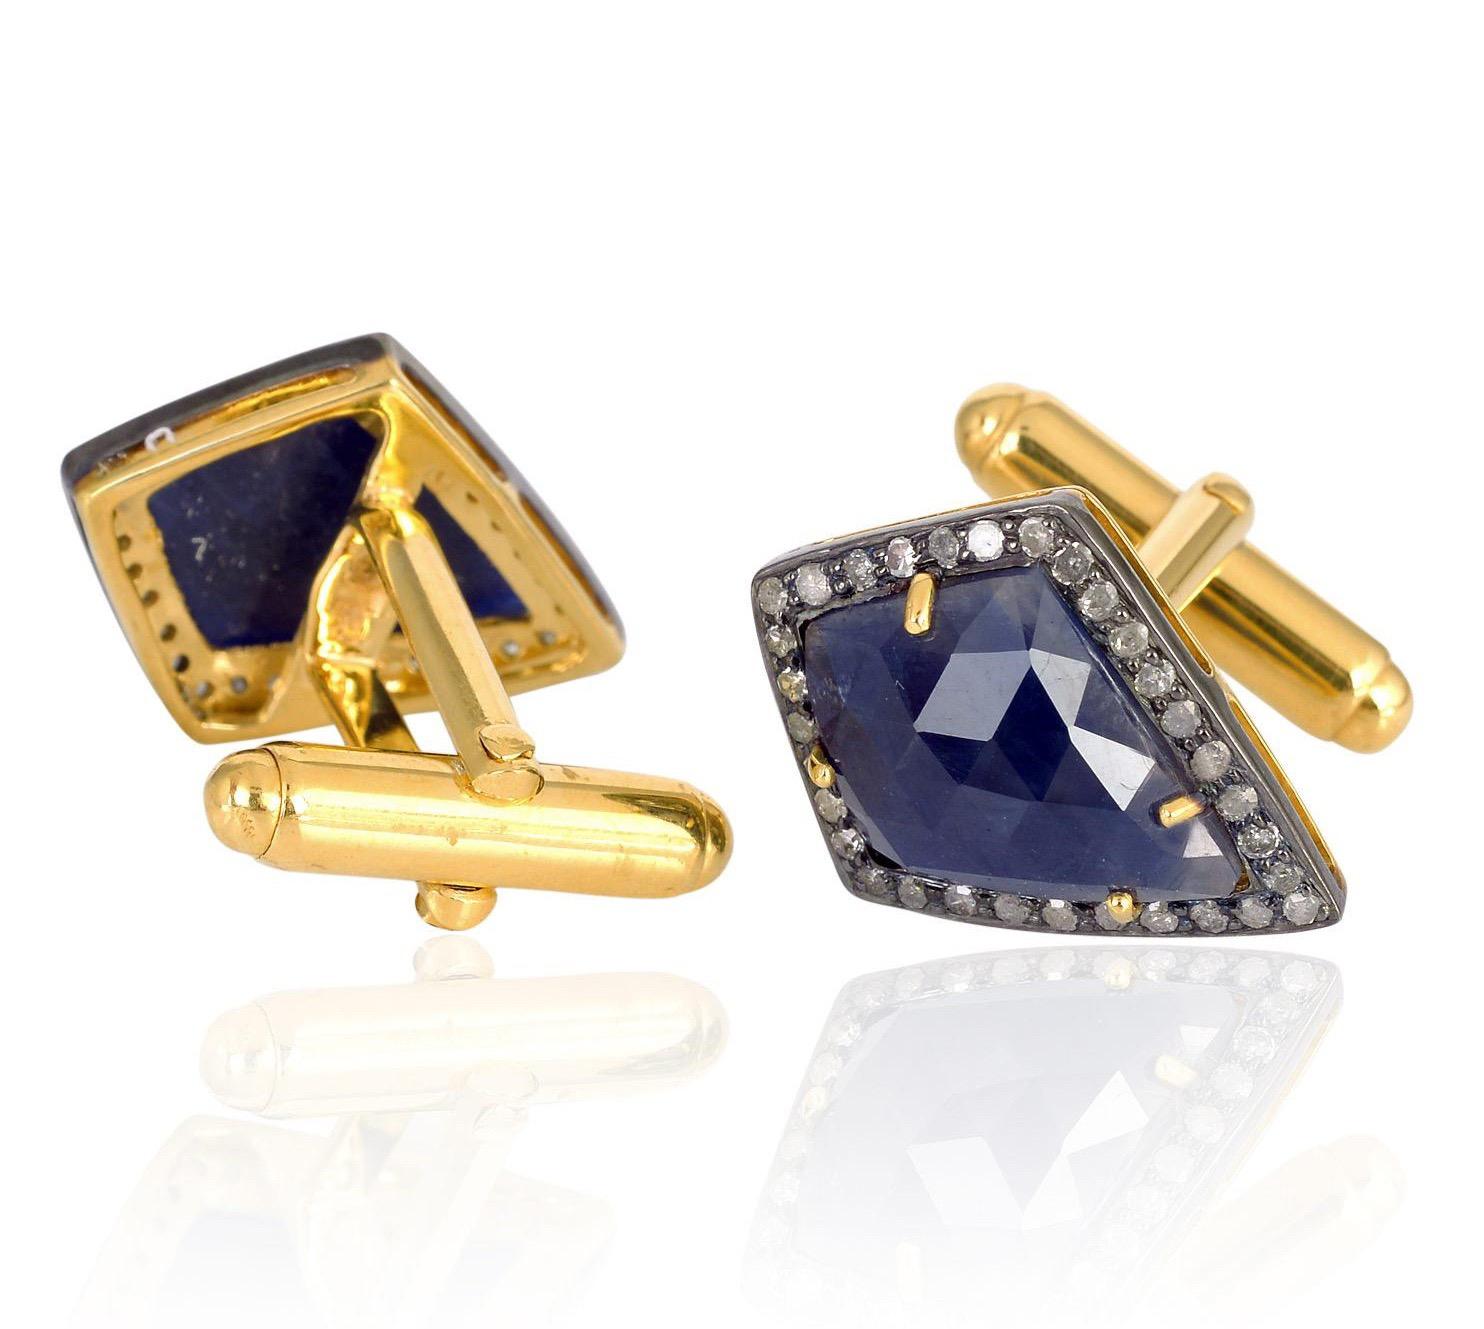 Cast from 18-karat gold and sterling silver, these cuff links are hand set with 22.64 carats blue sapphire and .70 carats of pave diamonds in blackened finish.

FOLLOW  MEGHNA JEWELS storefront to view the latest collection & exclusive pieces. 